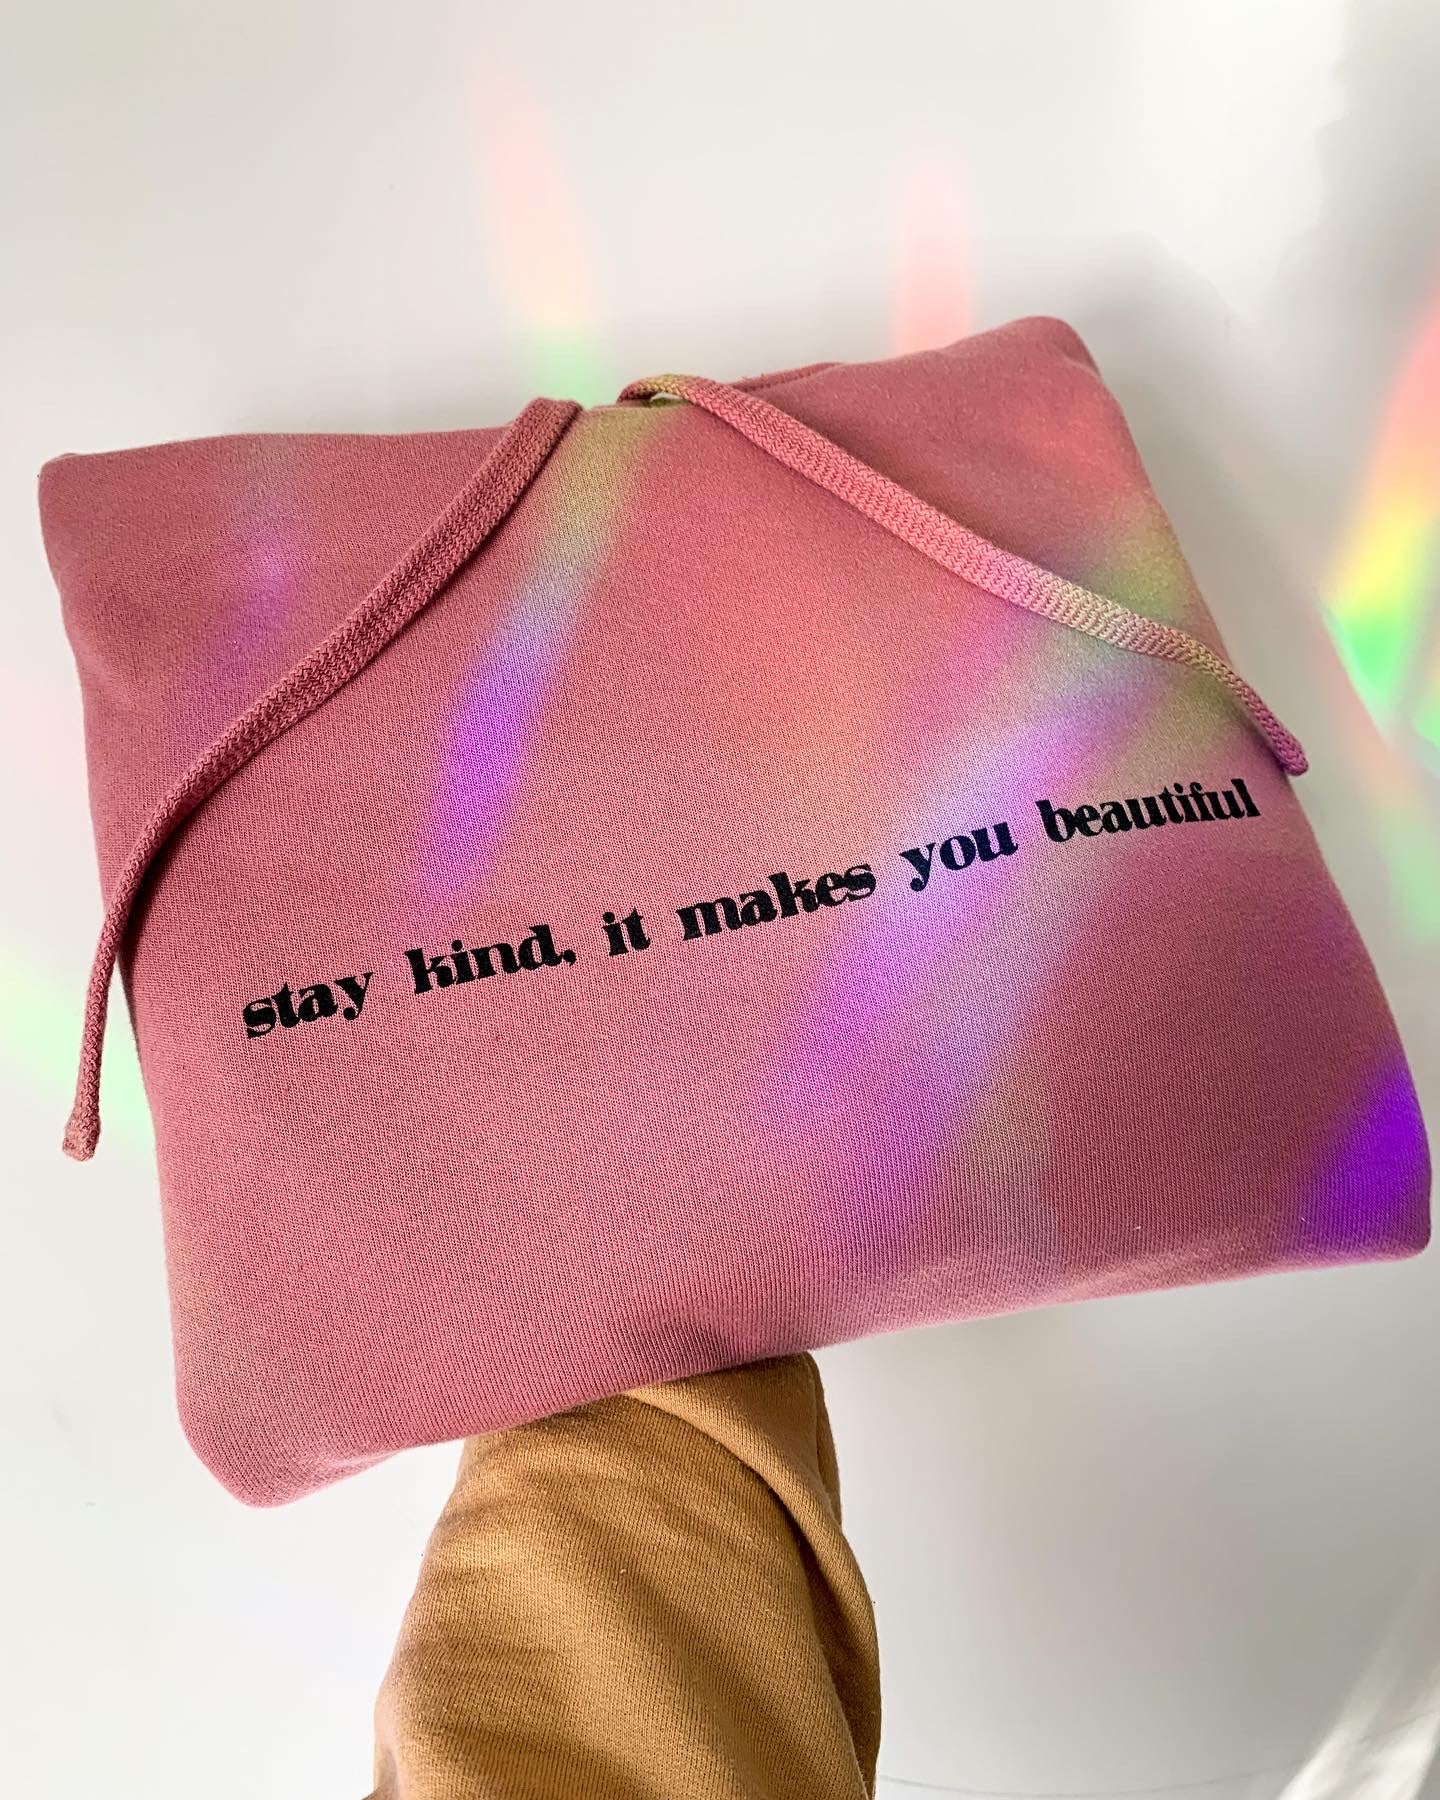 stay kind, it makes you beautiful hoodie